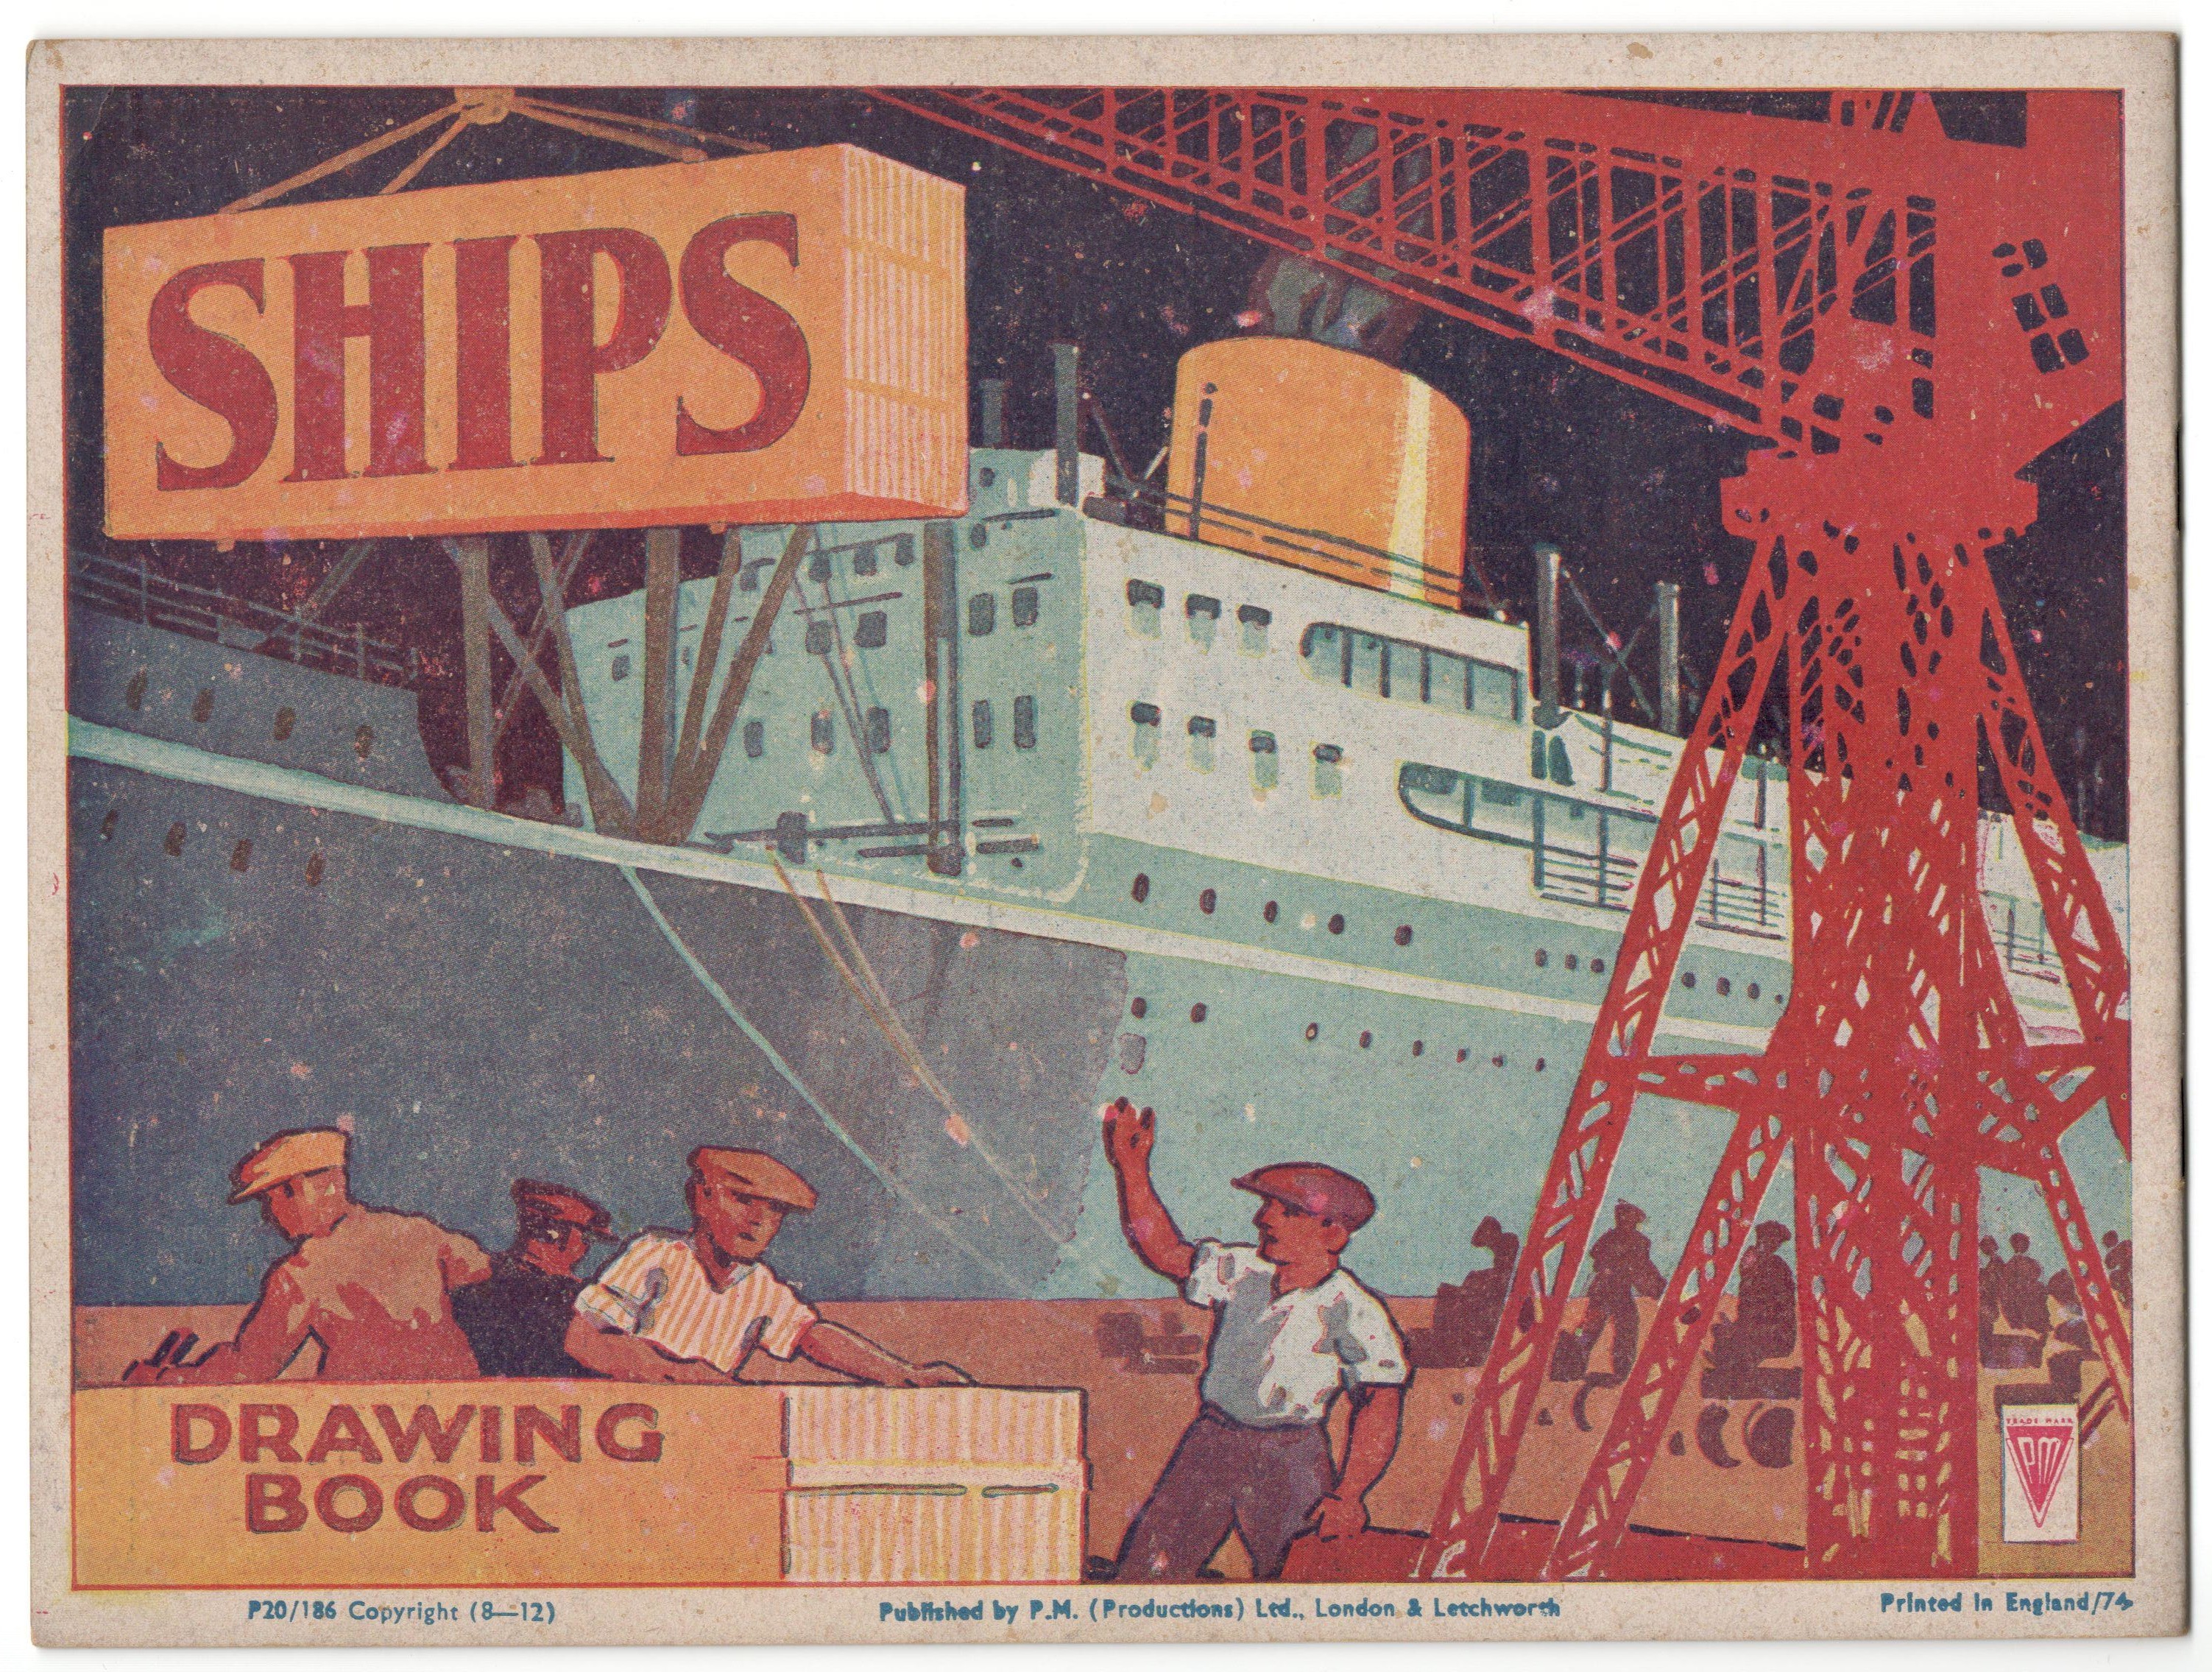 SHIPS DRAWING BOOK PUBLISHED BY P.M. (PRODUCTIONS) LTD LONDON & LETCHWORTH - Image 2 of 2